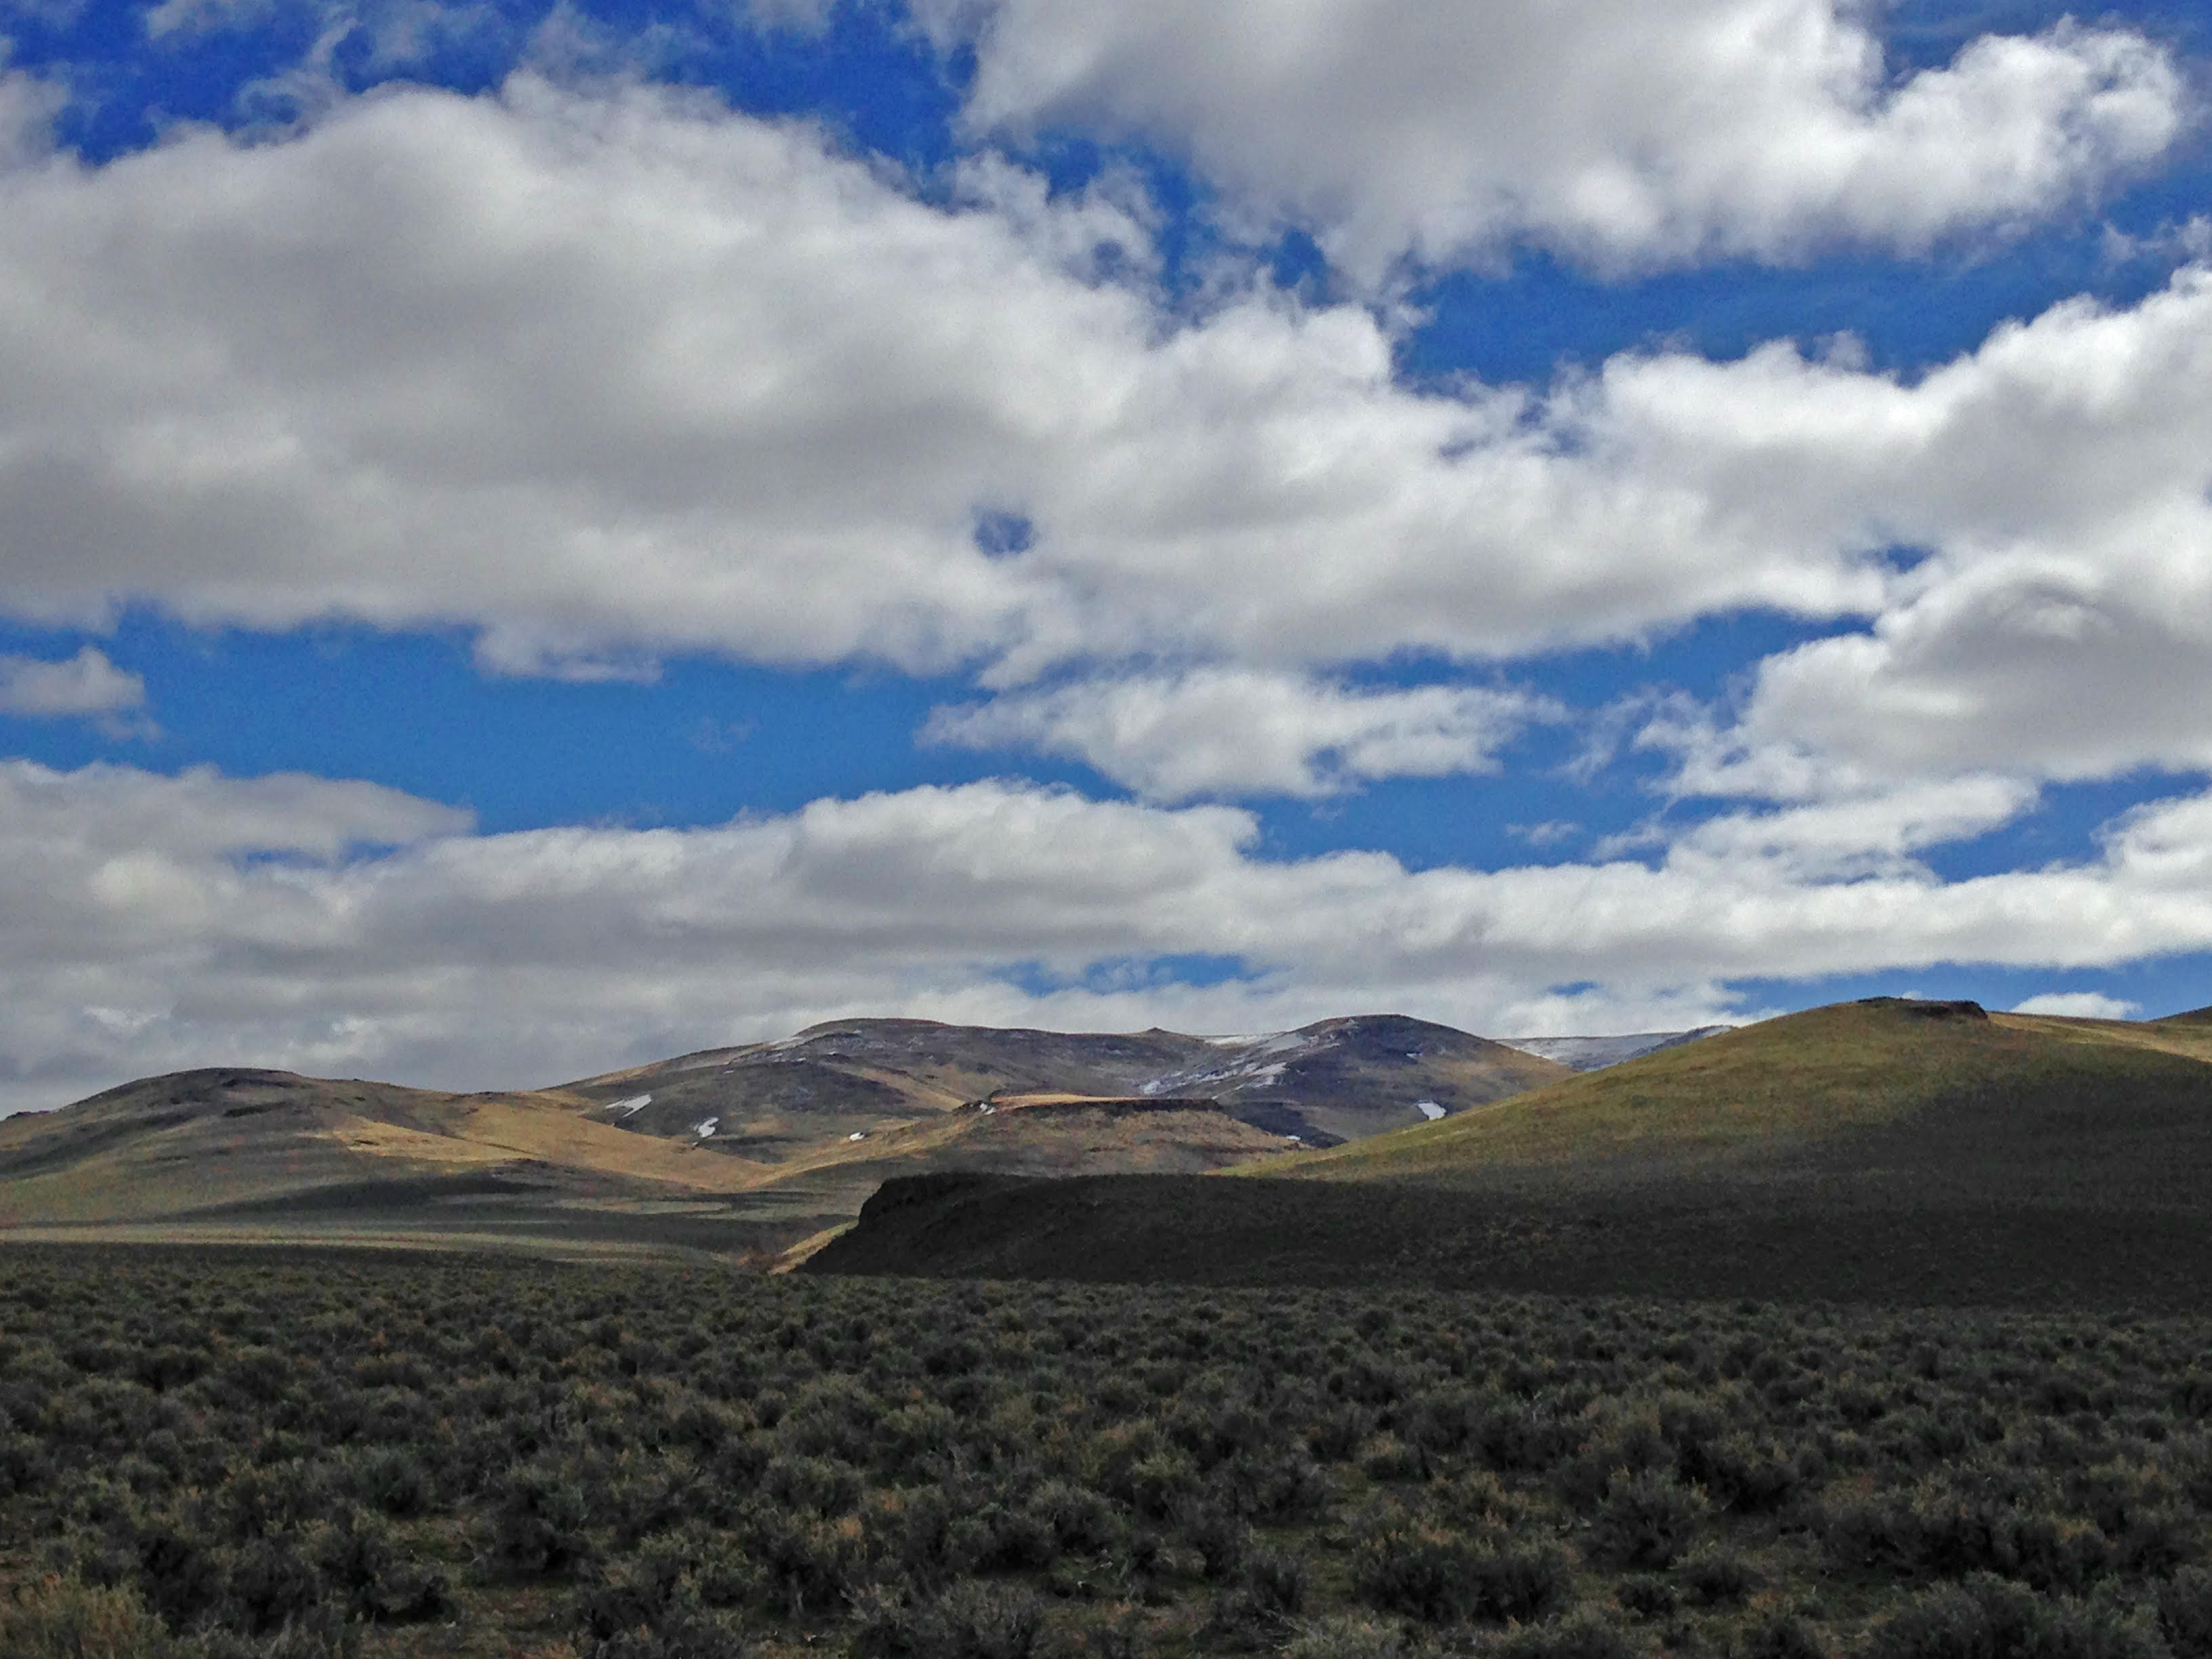 Western Watersheds Project’s statement on new Wilderness bill in Malheur County